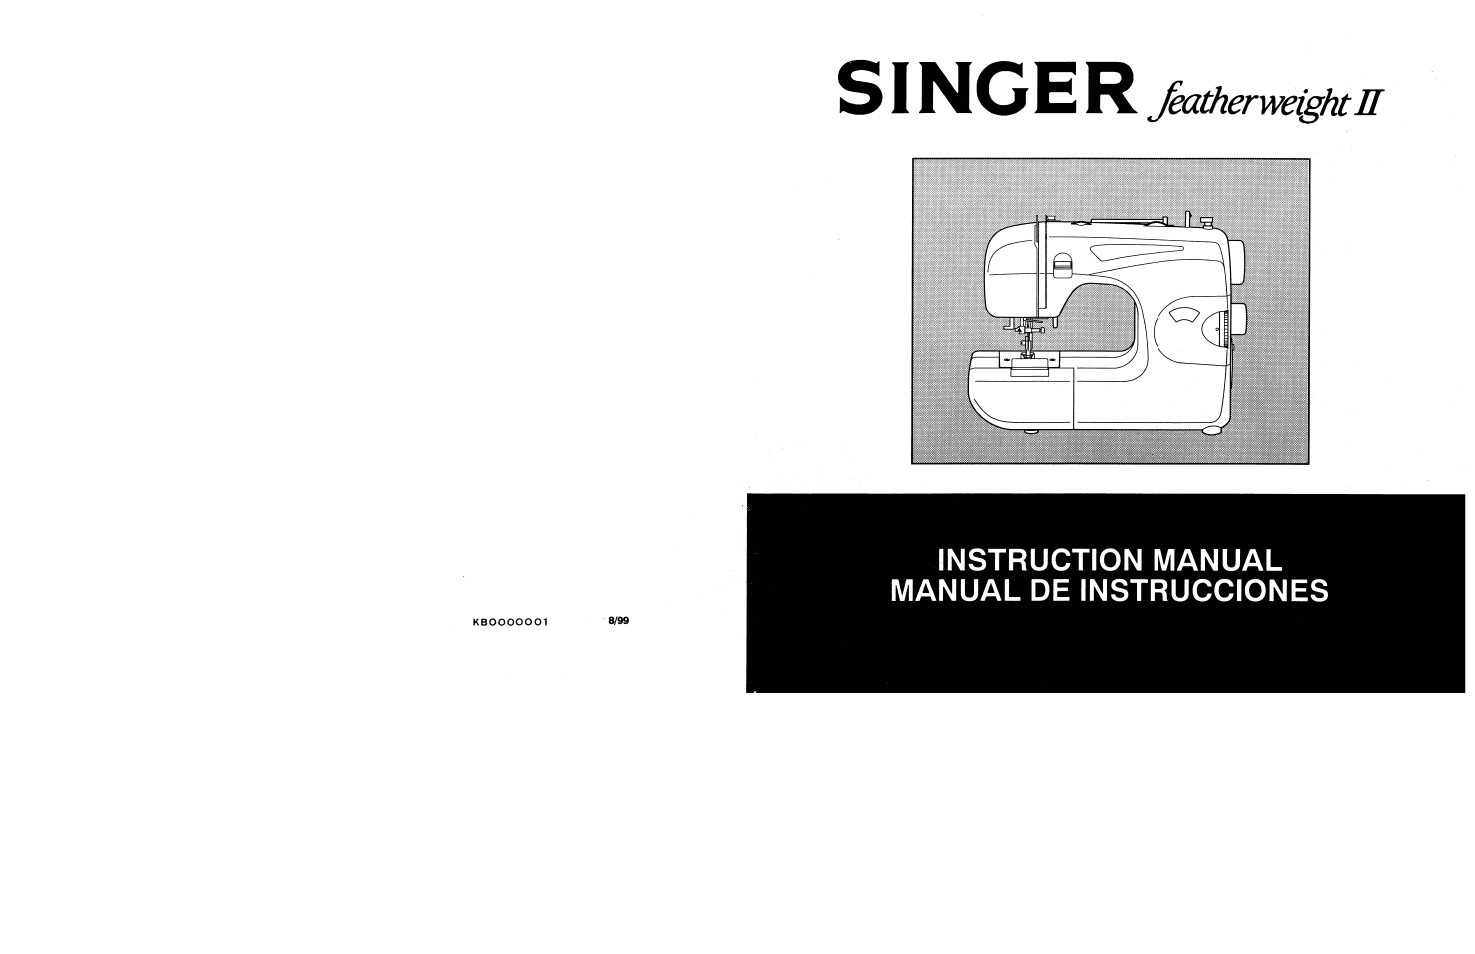 SINGER 117 FEATHERWEIGHT II User Manual | Page 40 / 40